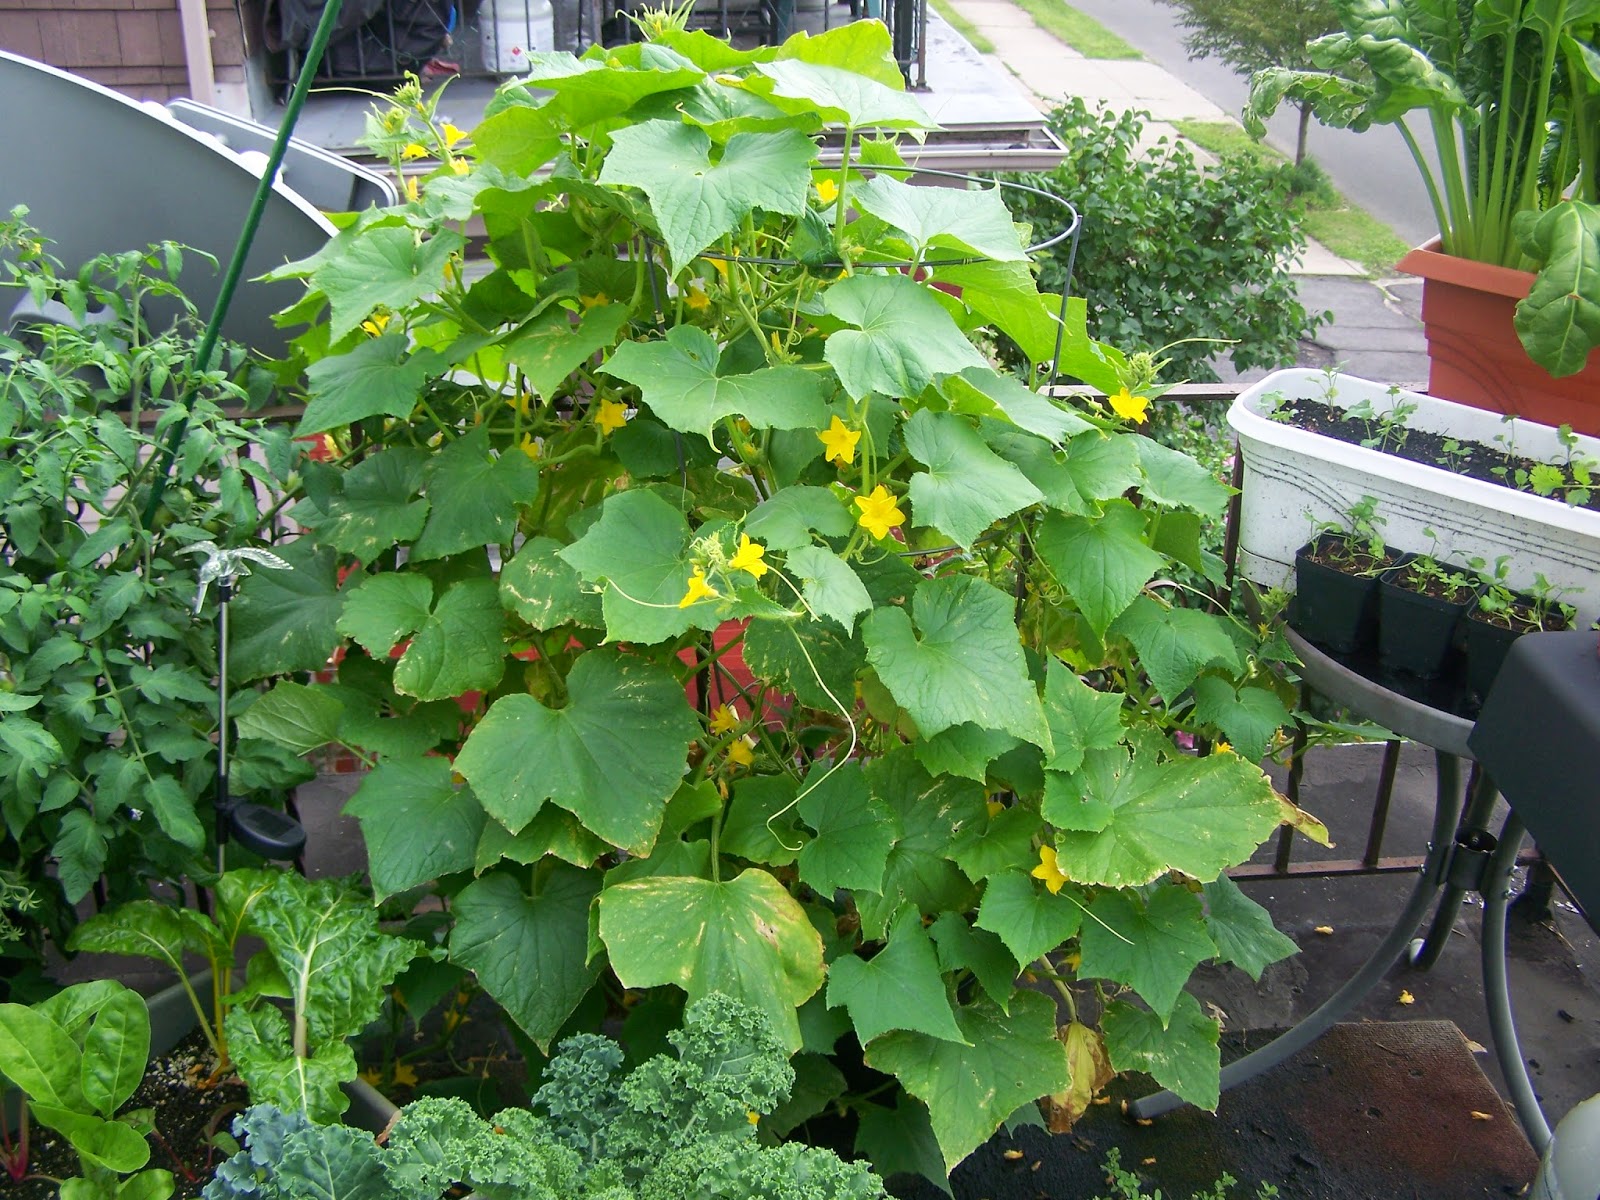 Captive Roots: Growing Cucumbers in Containers